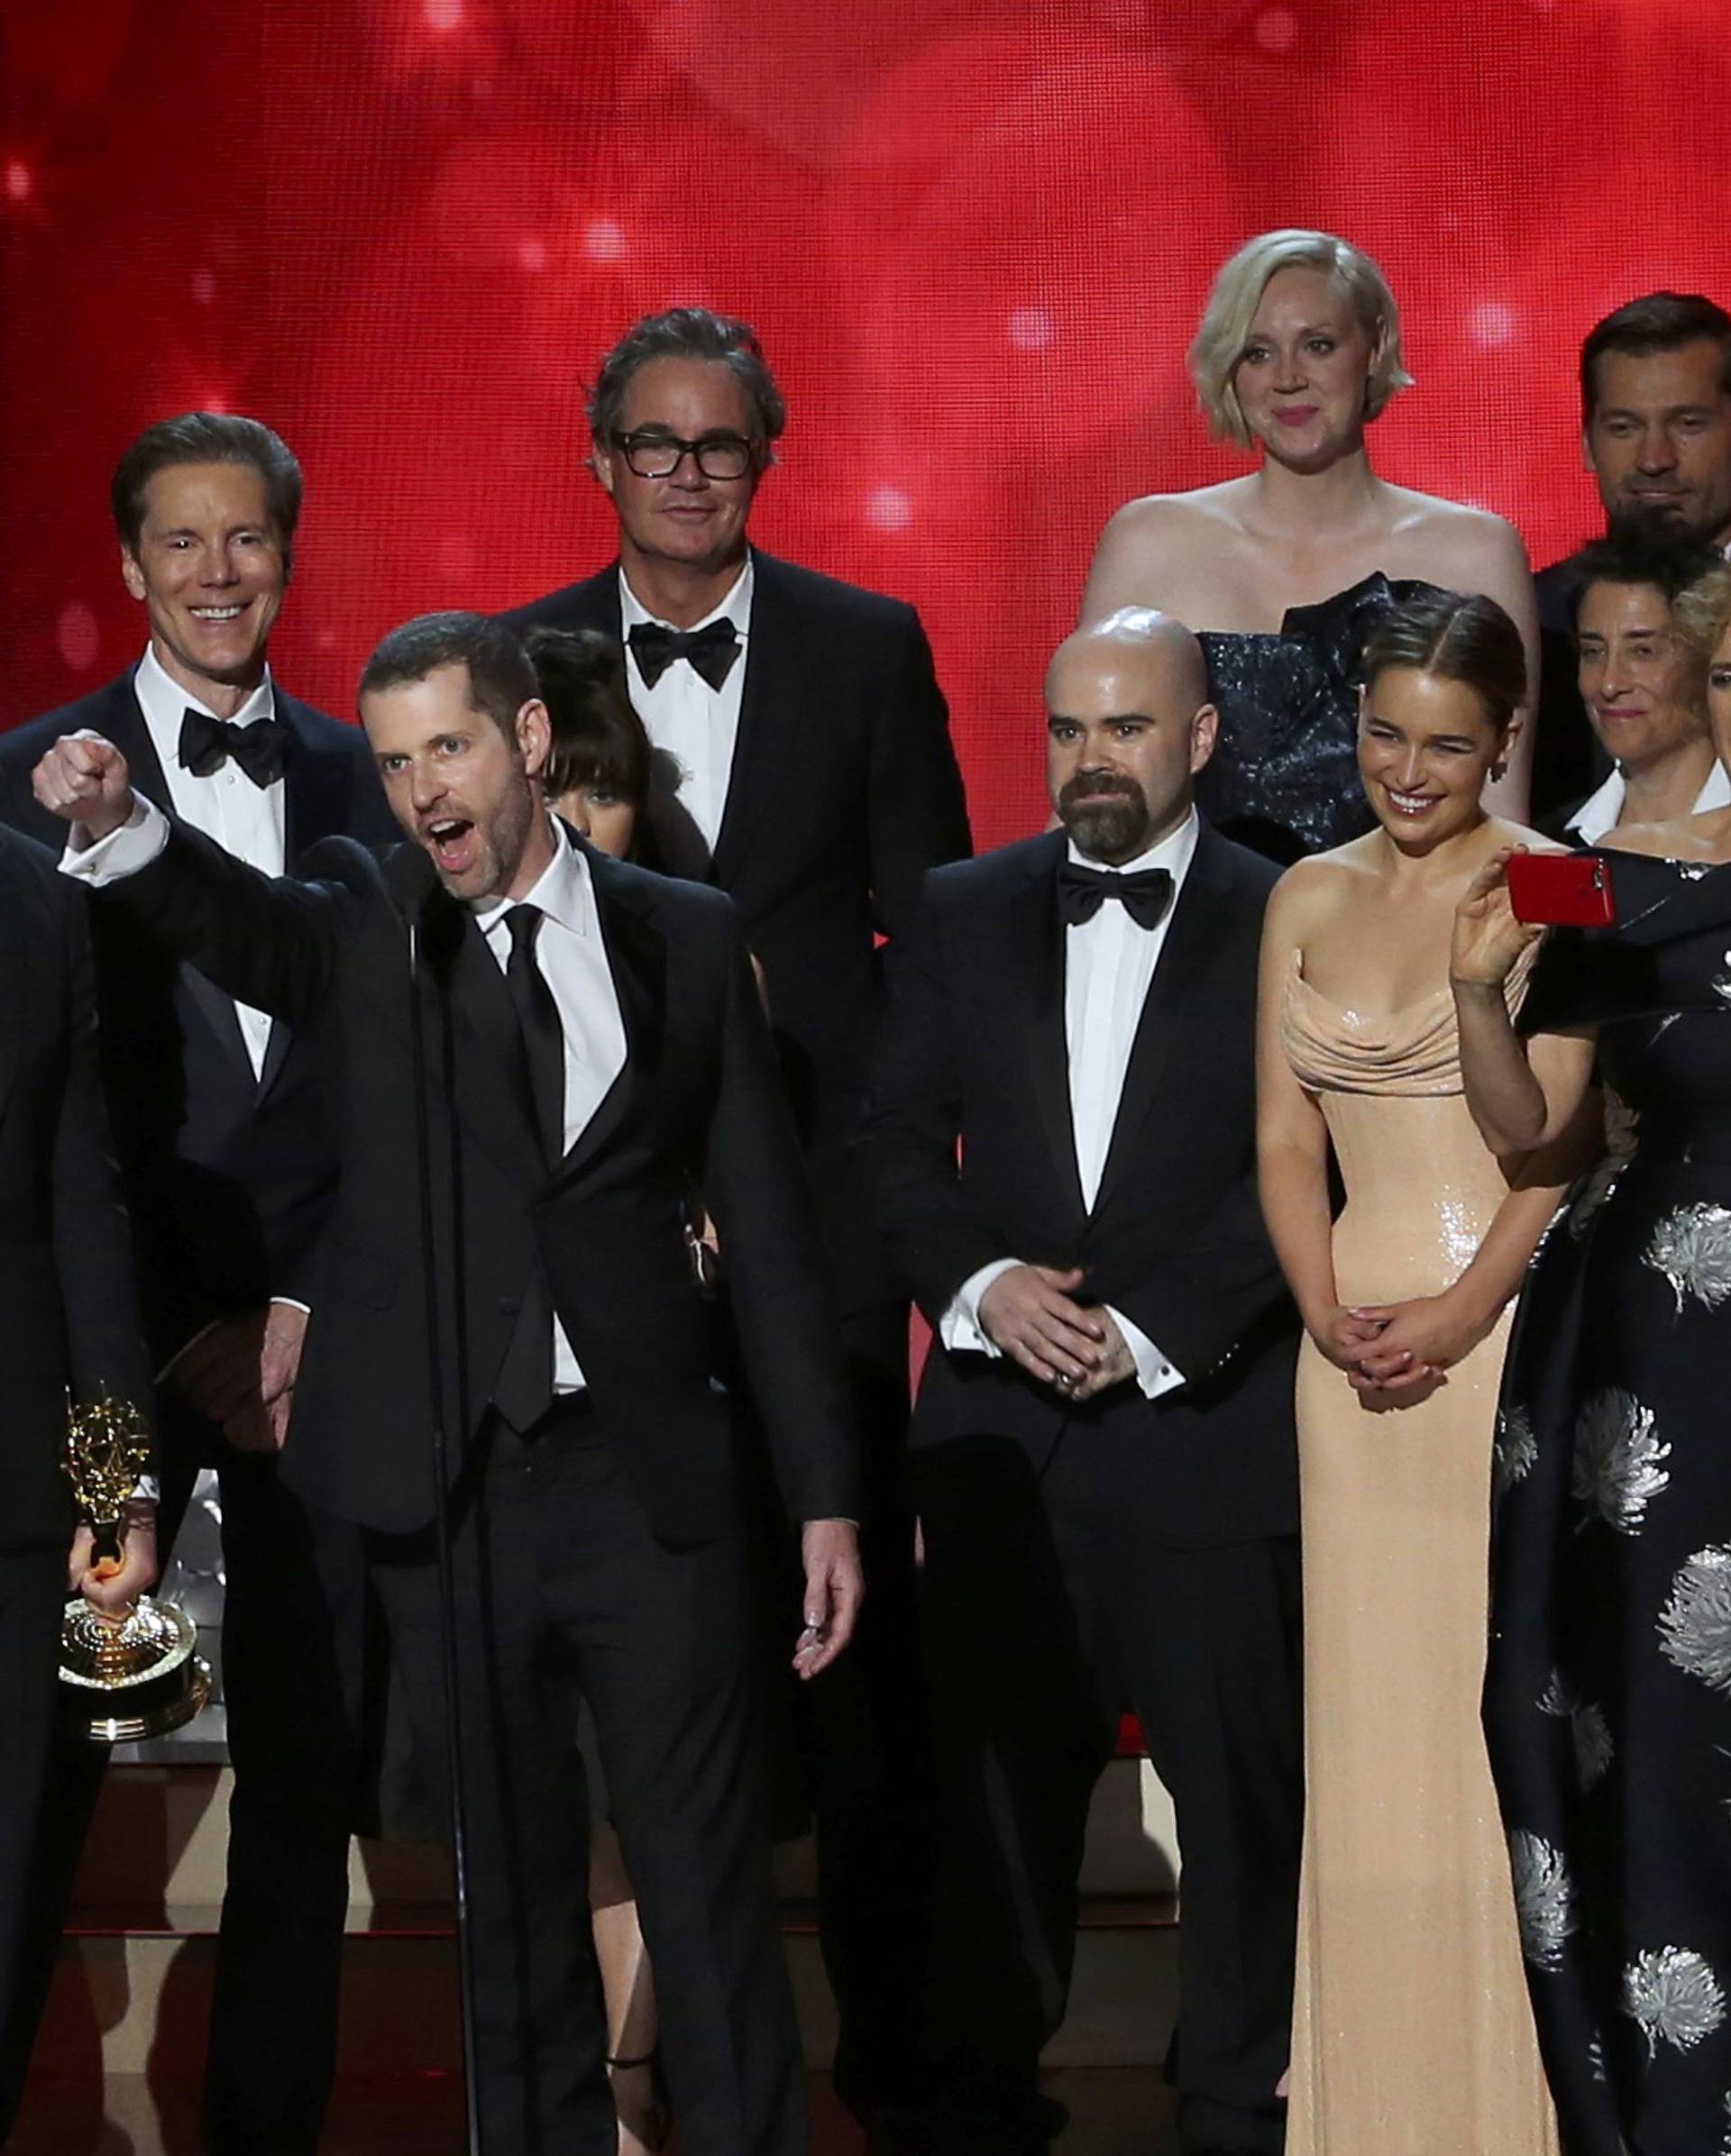 Executive Producers Benioff and Weiss accept the award for Oustanding Drama Series with the cast and crew at the 68th Primetime Emmy Awards in Los Angeles